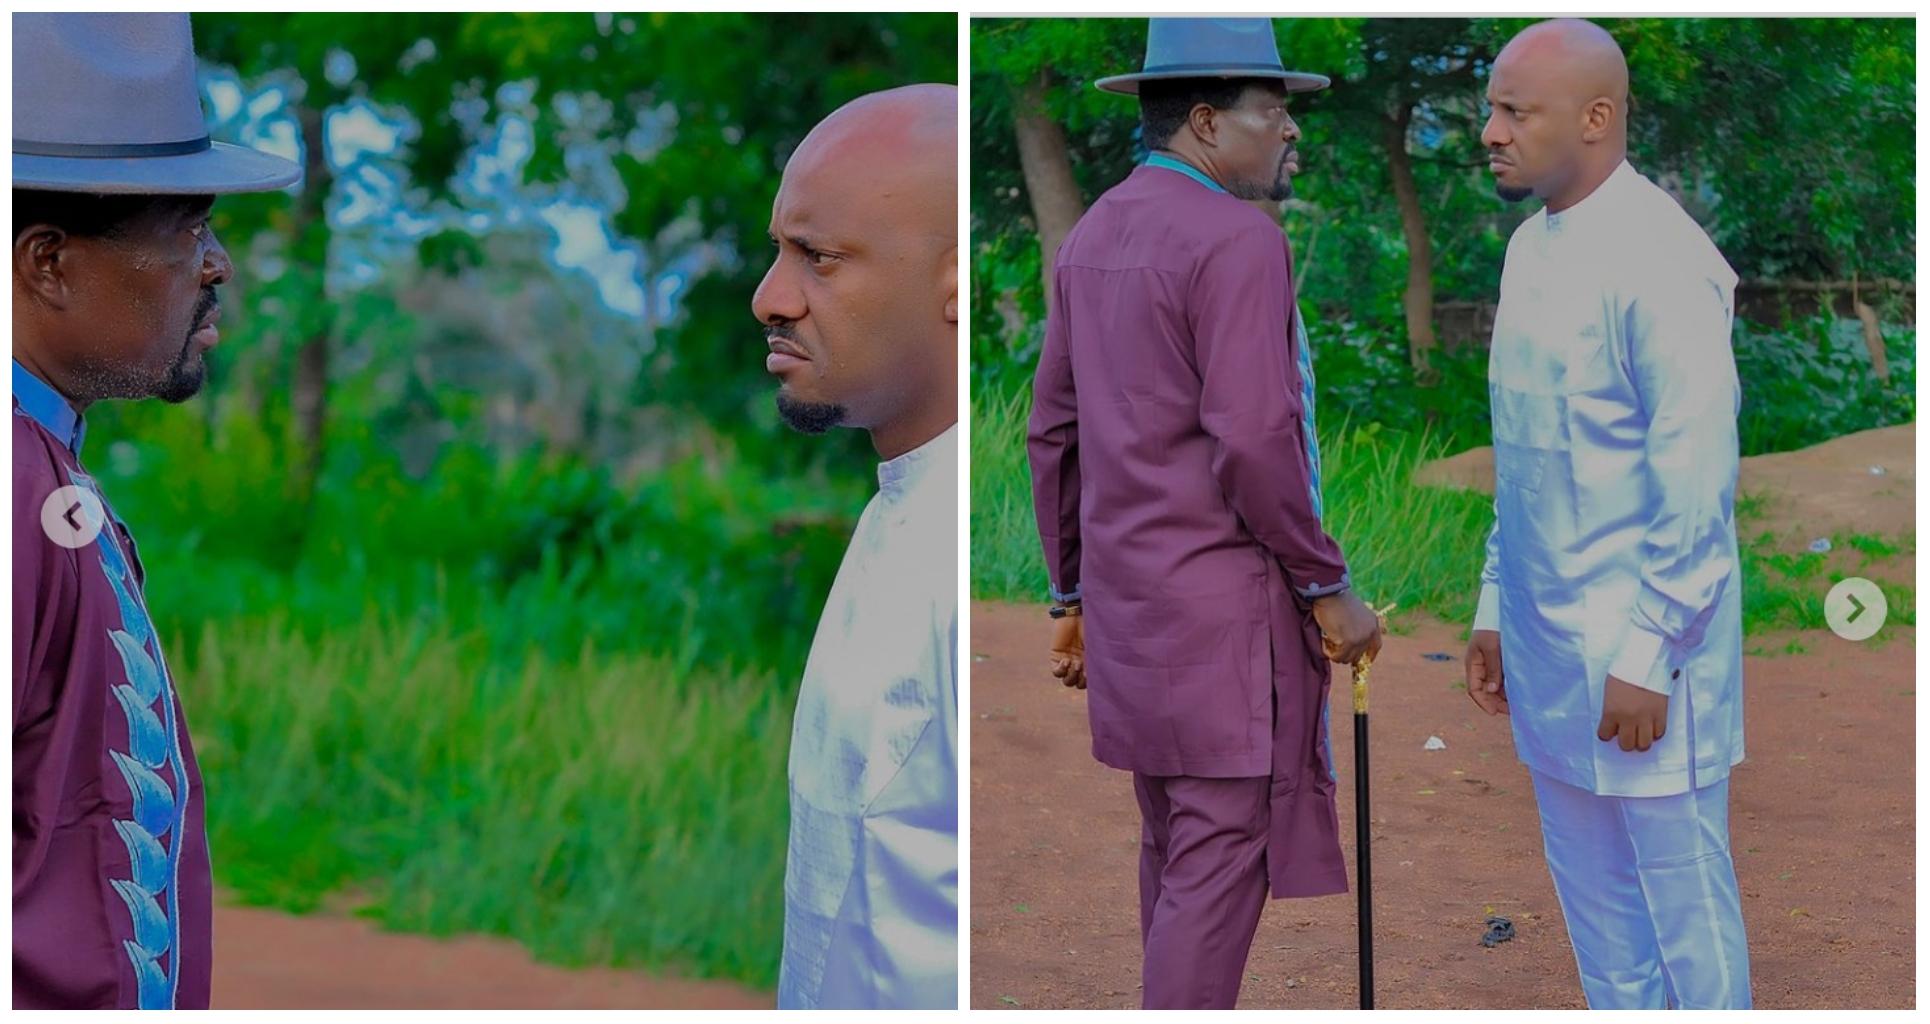 "I smell sacrifice'' - Fans react as Kanayo O Kanayo and Yul Edochi look at each other dangerously in new photo